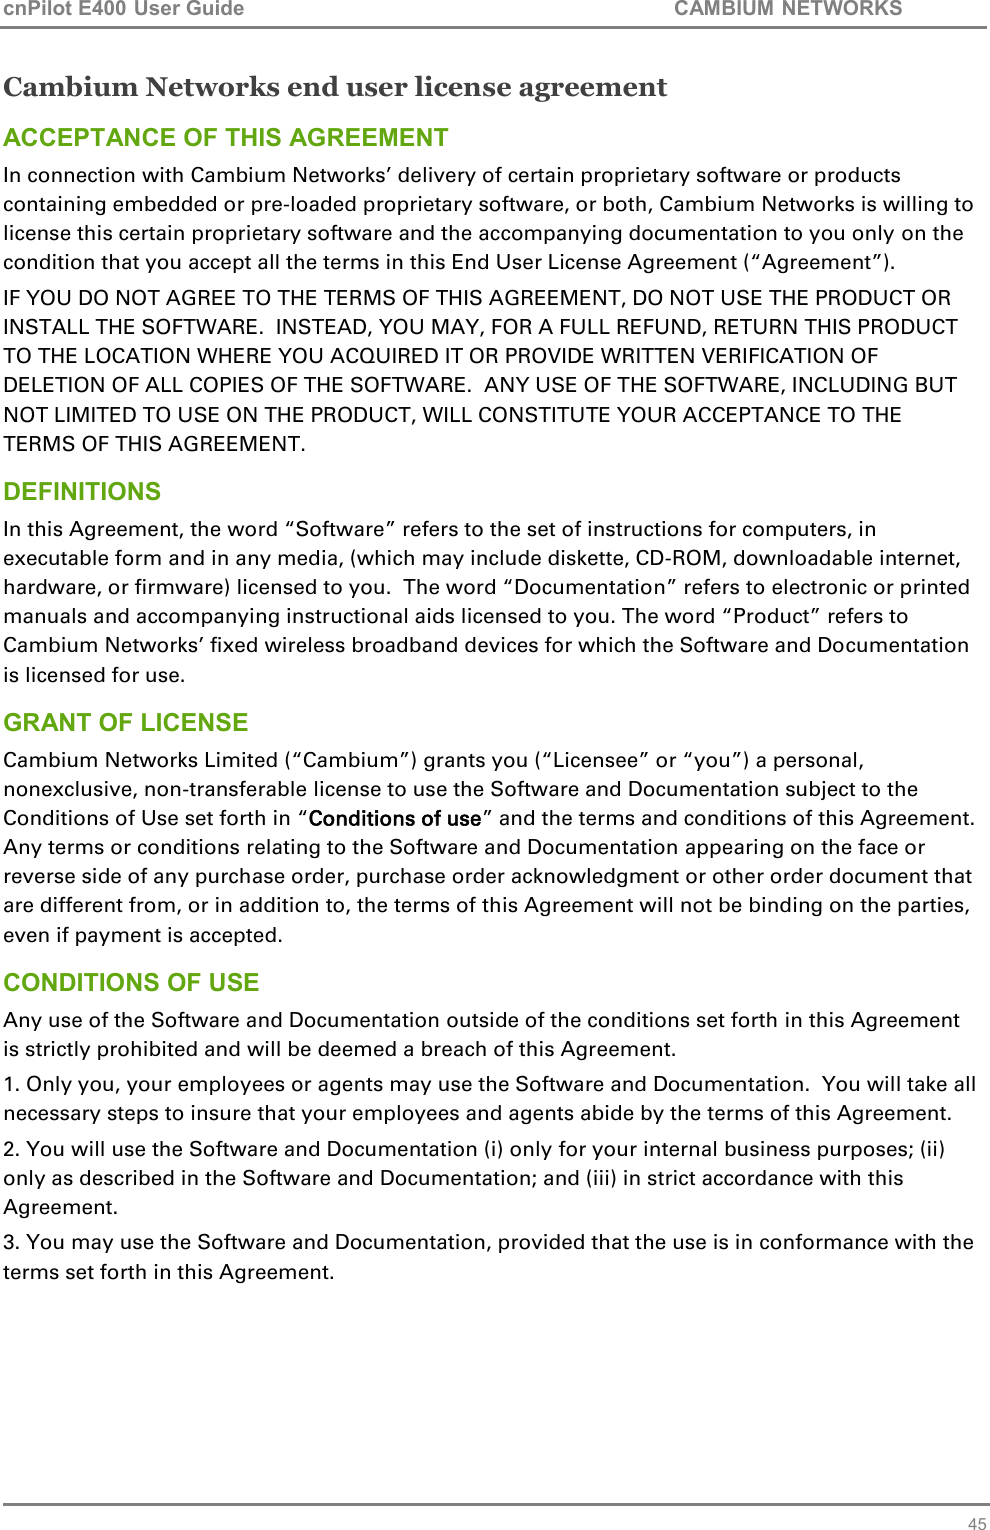 cnPilot E400 User Guide           CAMBIUM NETWORKS   45 Cambium Networks end user license agreement ACCEPTANCE OF THIS AGREEMENT In connection with Cambium Networks’ delivery of certain proprietary software or products containing embedded or pre-loaded proprietary software, or both, Cambium Networks is willing to license this certain proprietary software and the accompanying documentation to you only on the condition that you accept all the terms in this End User License Agreement (“Agreement”). IF YOU DO NOT AGREE TO THE TERMS OF THIS AGREEMENT, DO NOT USE THE PRODUCT OR INSTALL THE SOFTWARE.  INSTEAD, YOU MAY, FOR A FULL REFUND, RETURN THIS PRODUCT TO THE LOCATION WHERE YOU ACQUIRED IT OR PROVIDE WRITTEN VERIFICATION OF DELETION OF ALL COPIES OF THE SOFTWARE.  ANY USE OF THE SOFTWARE, INCLUDING BUT NOT LIMITED TO USE ON THE PRODUCT, WILL CONSTITUTE YOUR ACCEPTANCE TO THE TERMS OF THIS AGREEMENT.  DEFINITIONS In this Agreement, the word “Software” refers to the set of instructions for computers, in executable form and in any media, (which may include diskette, CD-ROM, downloadable internet, hardware, or firmware) licensed to you.  The word “Documentation” refers to electronic or printed manuals and accompanying instructional aids licensed to you. The word “Product” refers to Cambium Networks’ fixed wireless broadband devices for which the Software and Documentation is licensed for use. GRANT OF LICENSE Cambium Networks Limited (“Cambium”) grants you (“Licensee” or “you”) a personal, nonexclusive, non-transferable license to use the Software and Documentation subject to the Conditions of Use set forth in “Conditions of use” and the terms and conditions of this Agreement.  Any terms or conditions relating to the Software and Documentation appearing on the face or reverse side of any purchase order, purchase order acknowledgment or other order document that are different from, or in addition to, the terms of this Agreement will not be binding on the parties, even if payment is accepted. CONDITIONS OF USE Any use of the Software and Documentation outside of the conditions set forth in this Agreement is strictly prohibited and will be deemed a breach of this Agreement.  1. Only you, your employees or agents may use the Software and Documentation.  You will take all necessary steps to insure that your employees and agents abide by the terms of this Agreement. 2. You will use the Software and Documentation (i) only for your internal business purposes; (ii) only as described in the Software and Documentation; and (iii) in strict accordance with this Agreement. 3. You may use the Software and Documentation, provided that the use is in conformance with the terms set forth in this Agreement.    